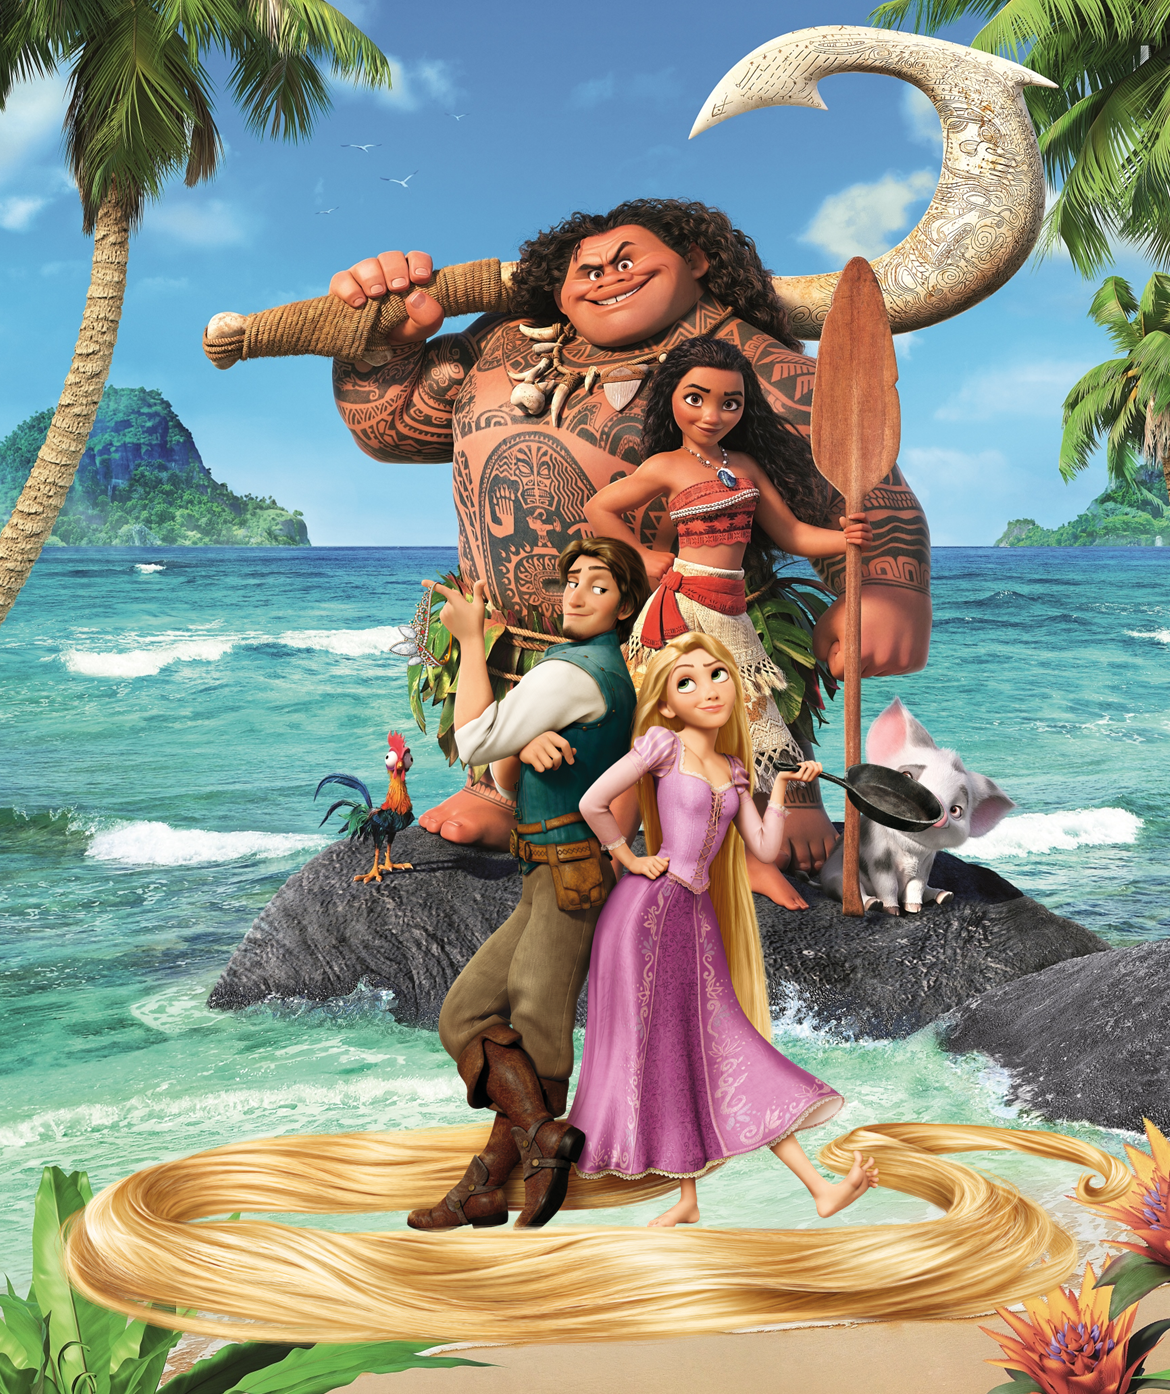 Tangled Moana | Rise of the Brave Tangled Dragons Wiki | FANDOM powered